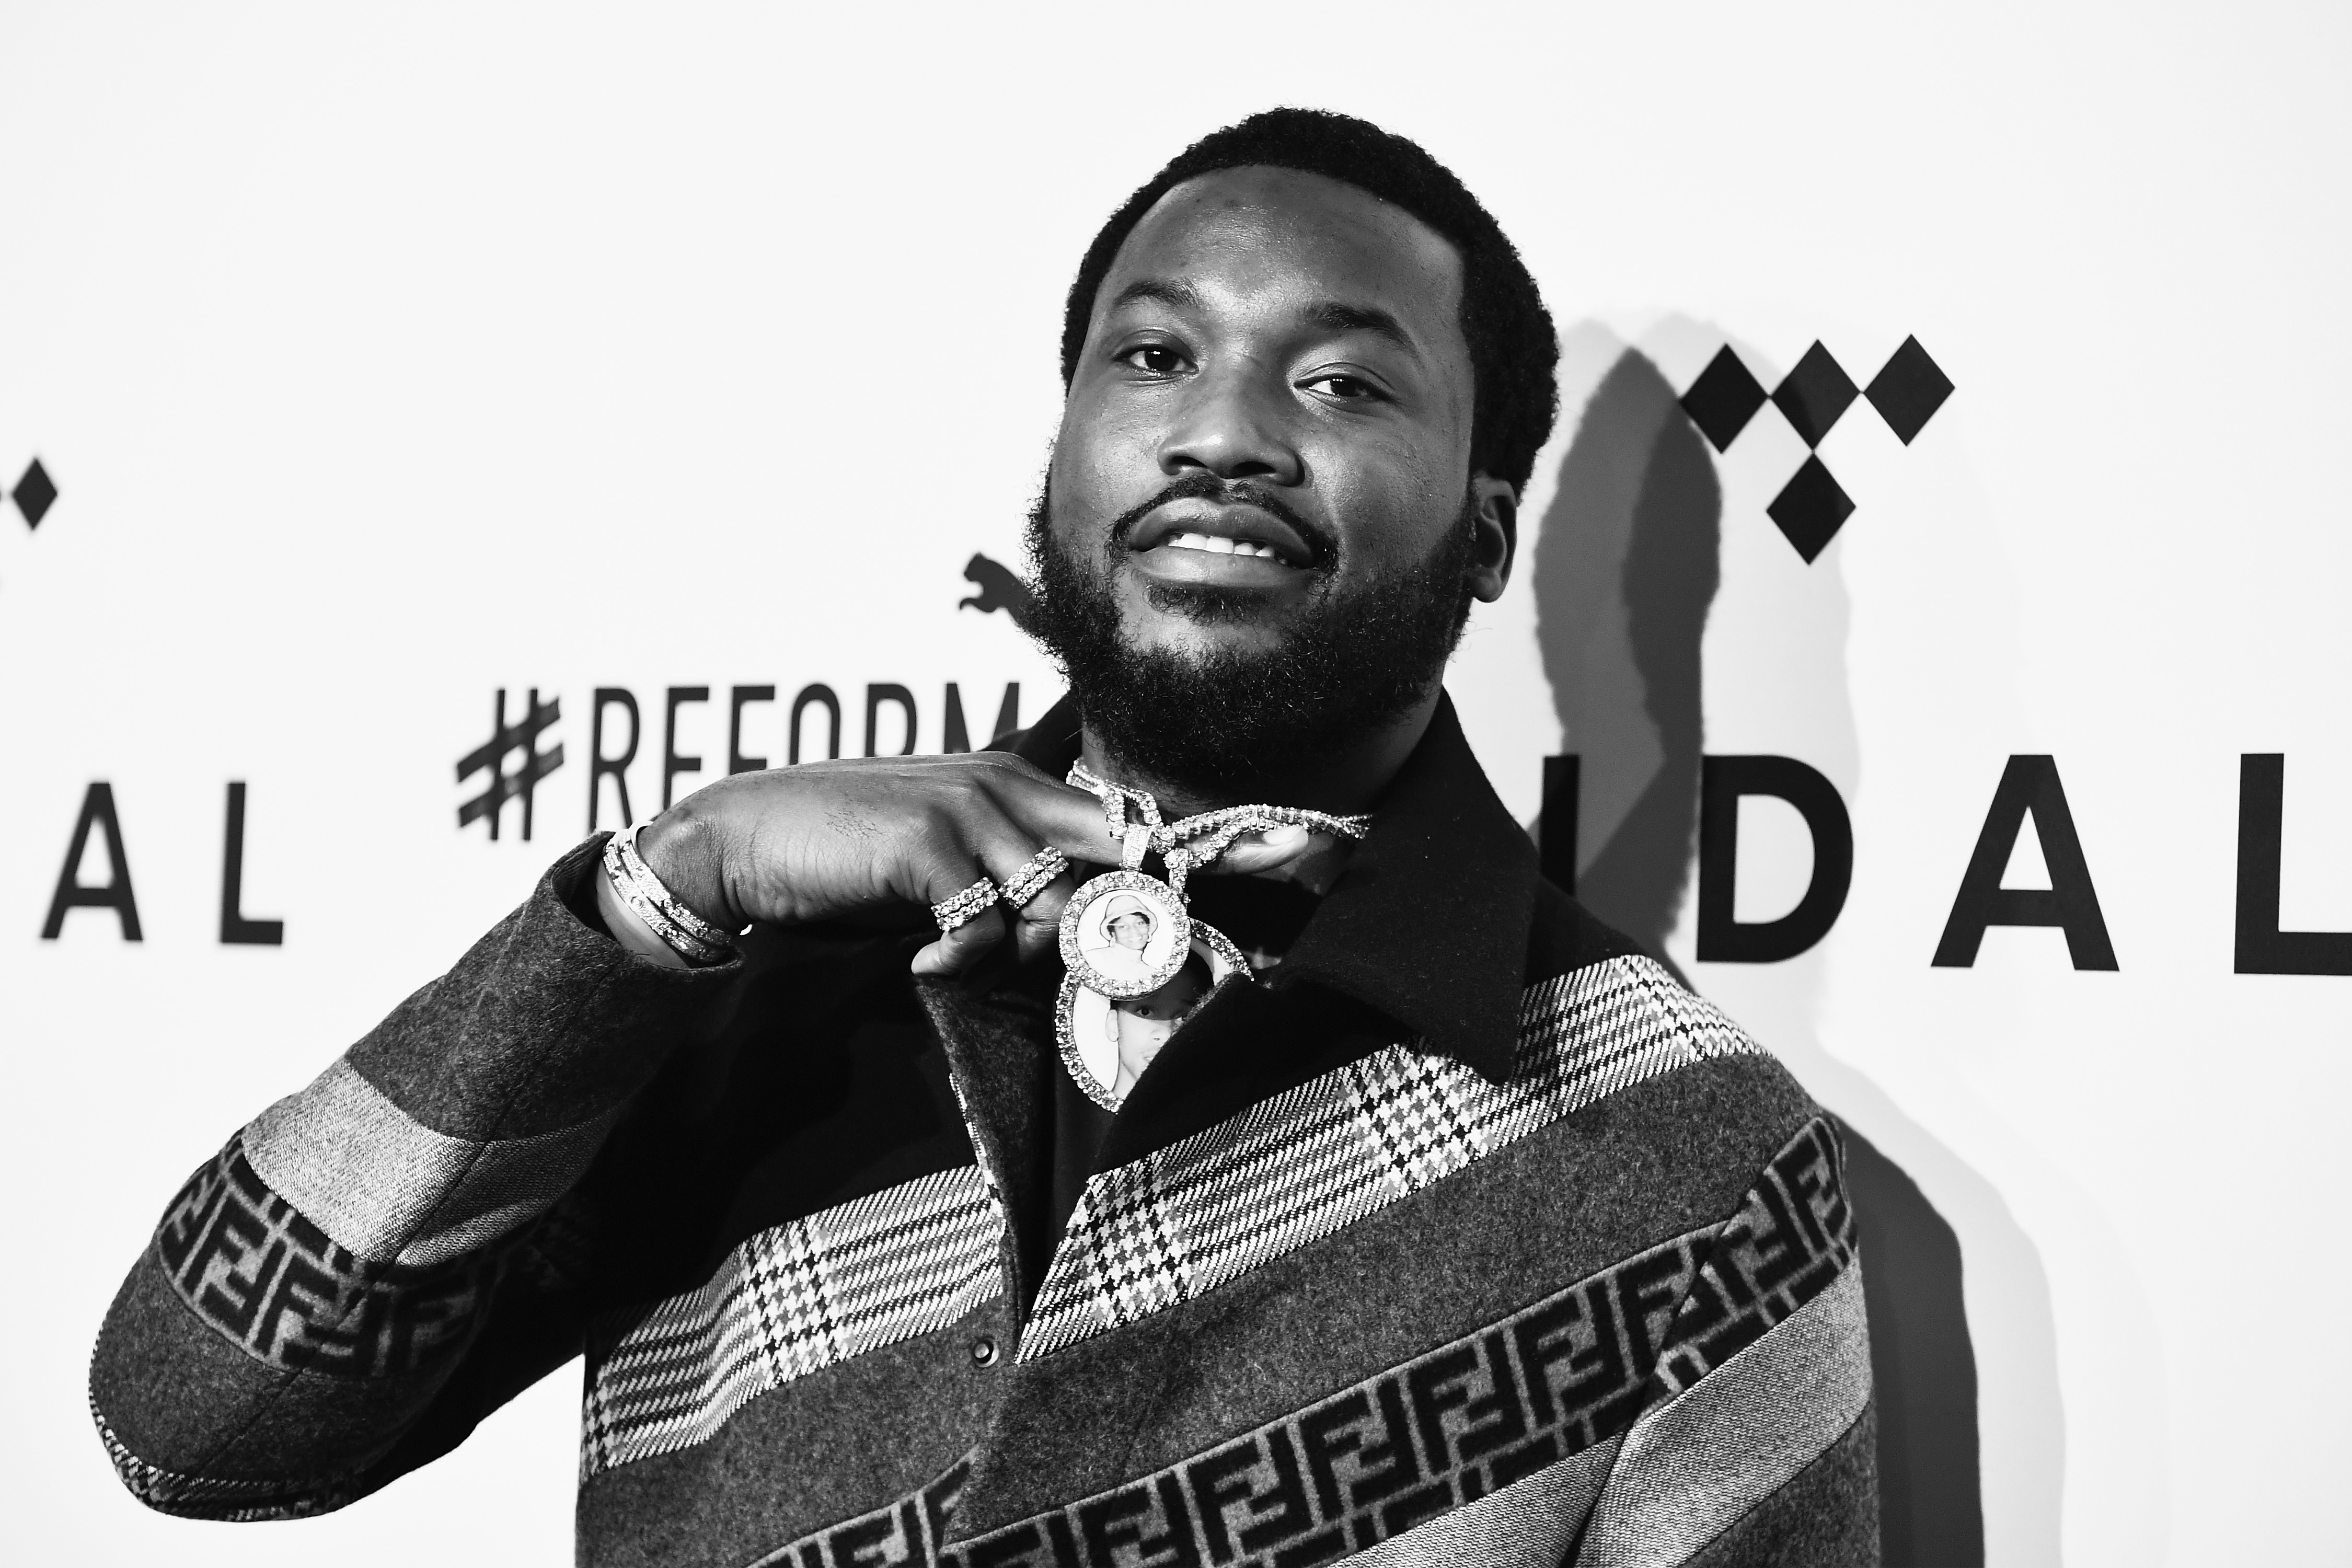 Meek Mill to Perform at Roc Nation's NFL Kickoff Concert